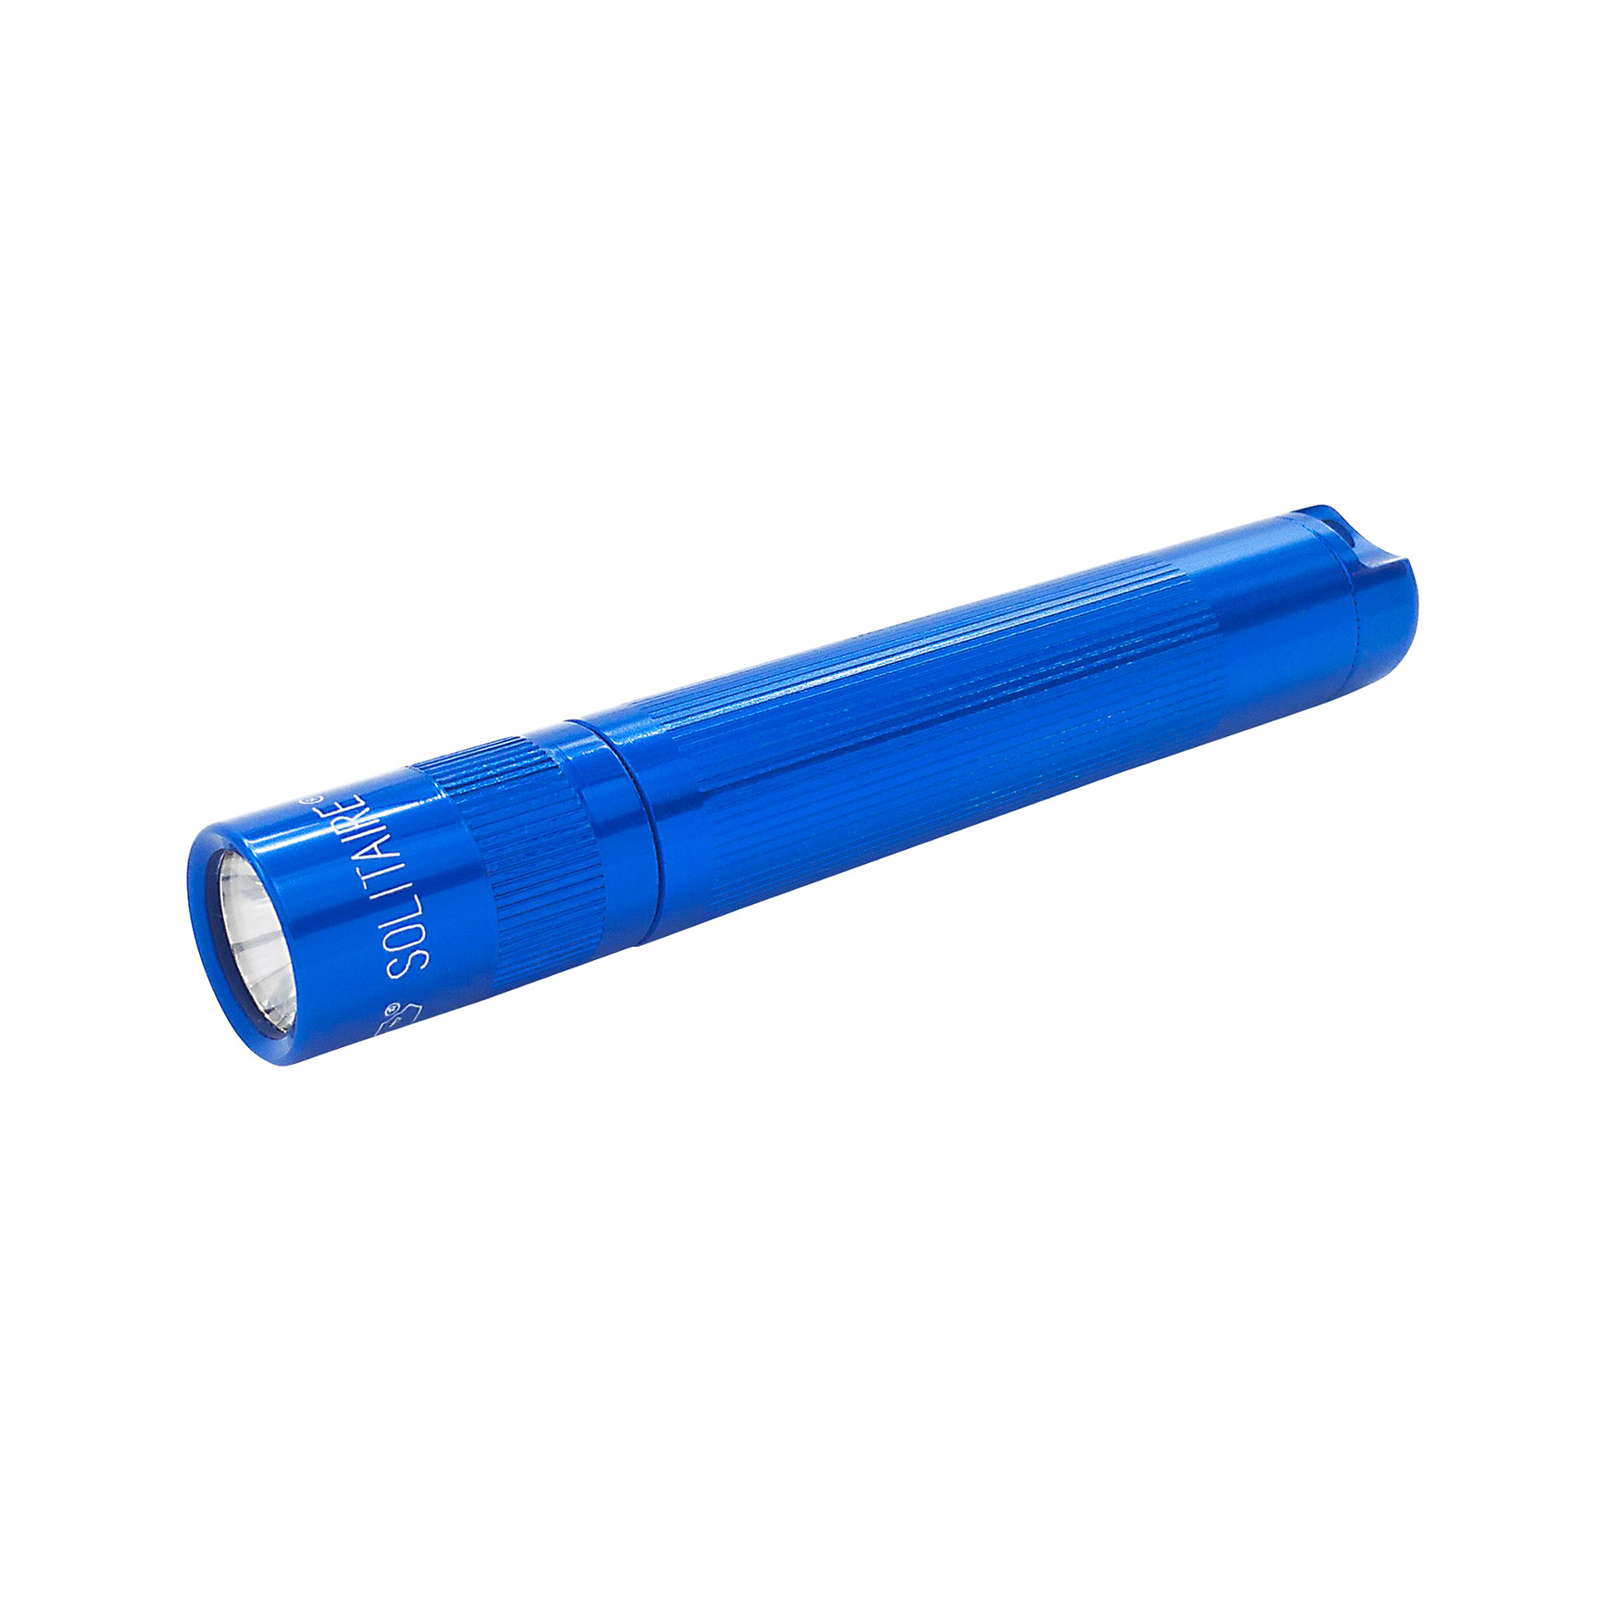 Maglite Xenon torch Solitaire 1-Cell AAA, Boxer, blue